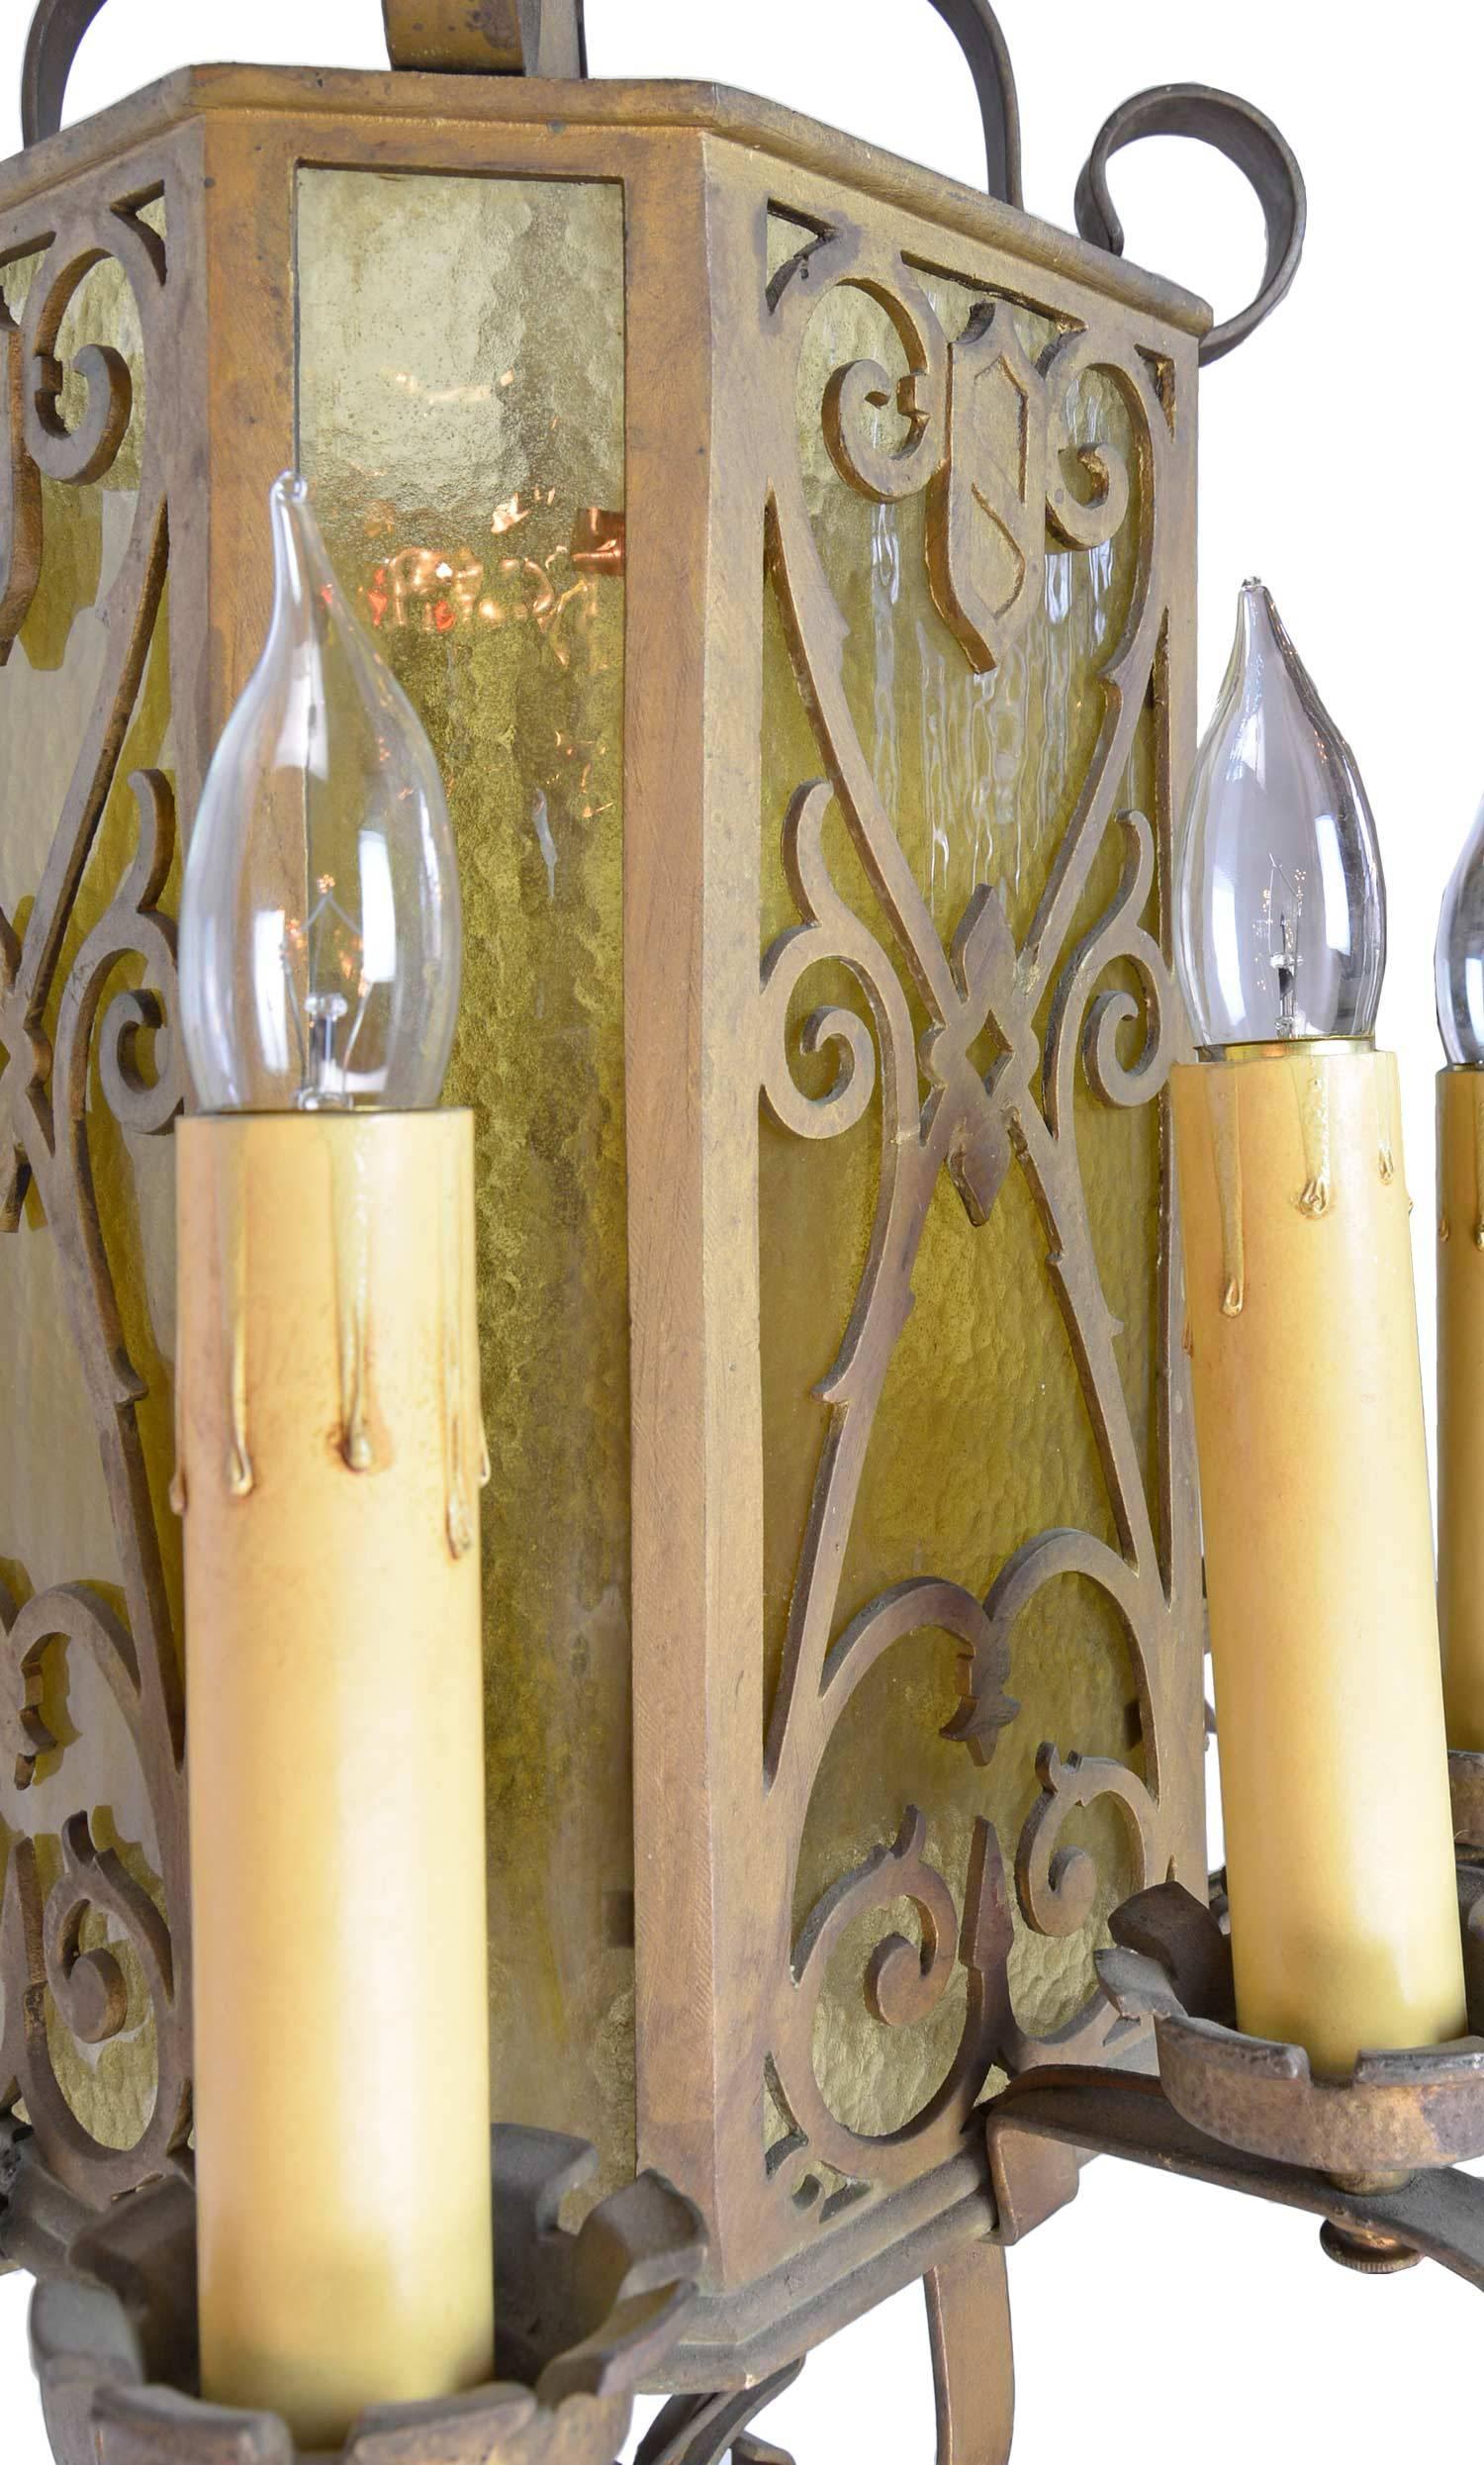 A Gothic Revival-style fixture with classic details made out of heavy cast brass. This fixture is compact in design, but its eight candles provide plenty of light.

We find that early antique lighting was designed as objects of art and we treat each